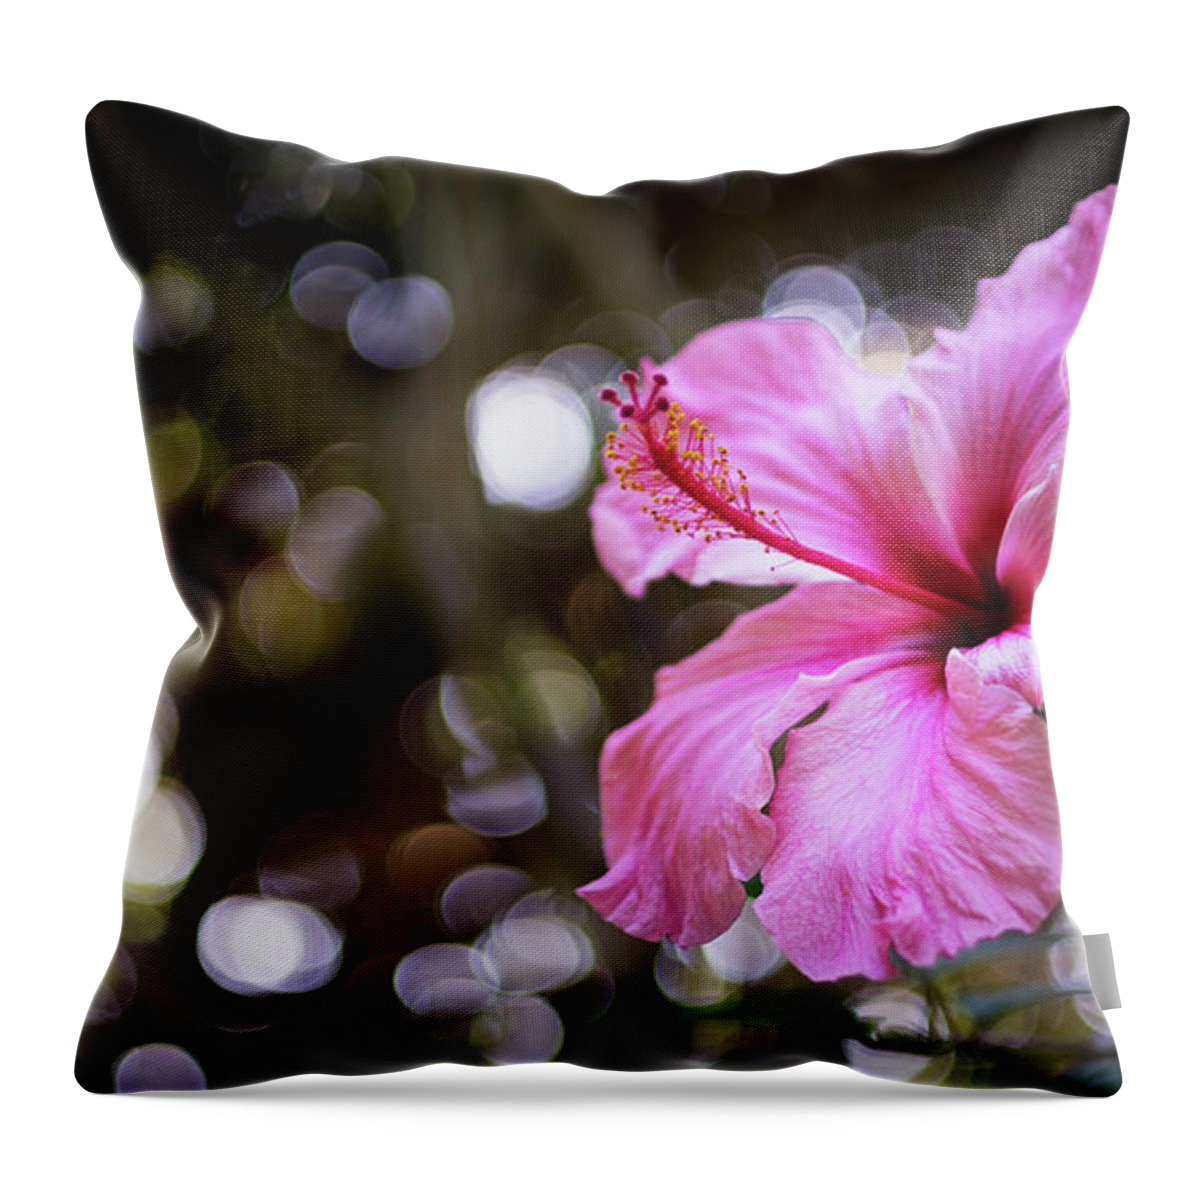 Beautiful Throw Pillow featuring the photograph Hibiscus Flower Bloom by Pablo Avanzini